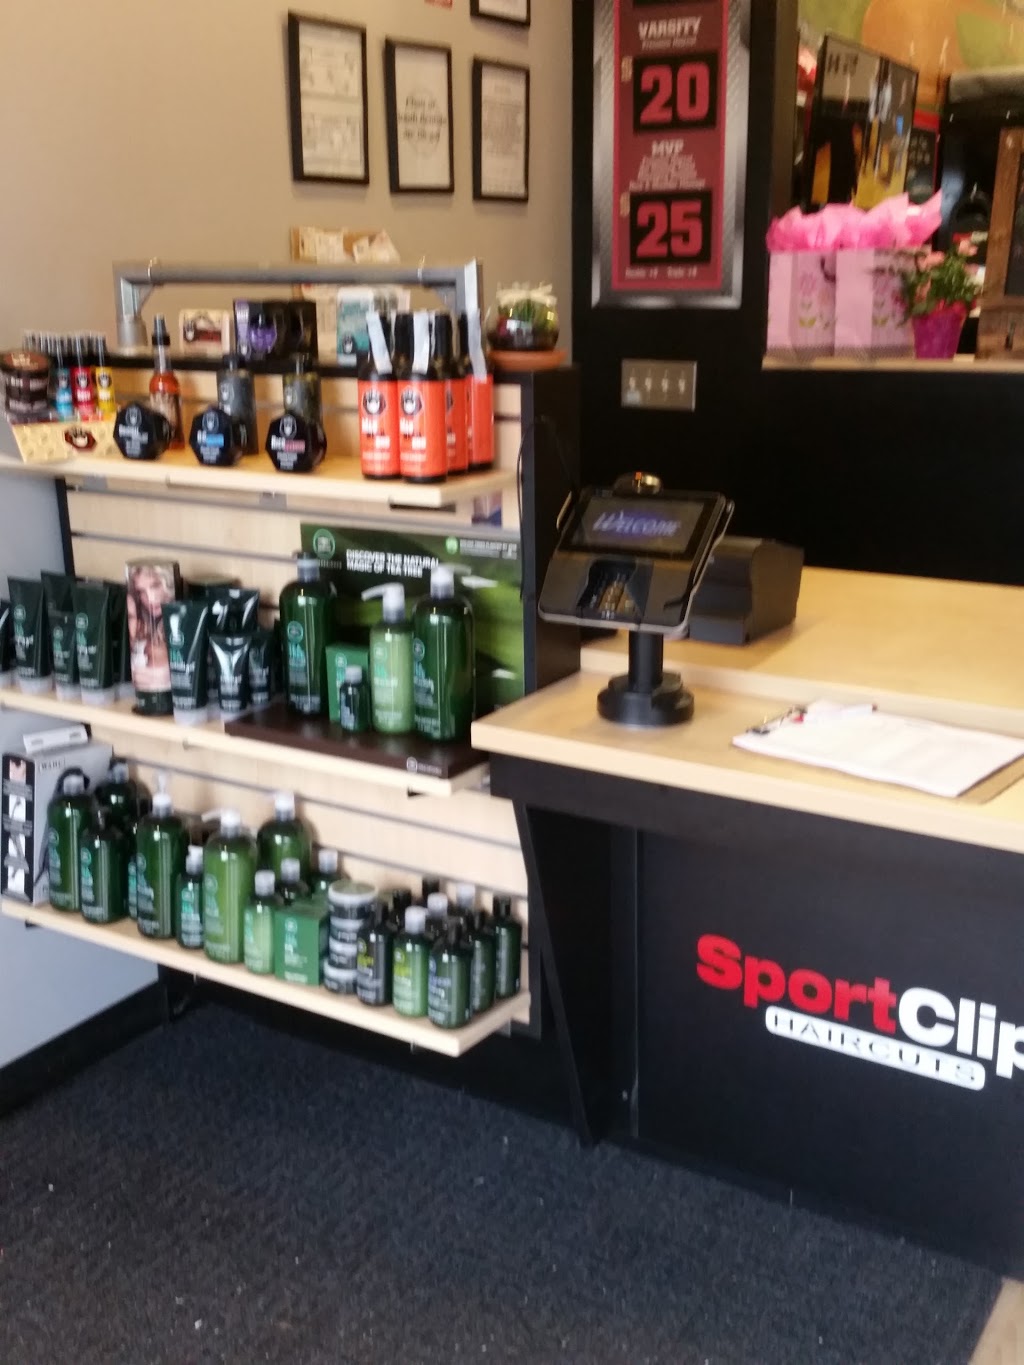 Sport Clips Haircuts of Somerset | 456 Elizabeth Ave, Somerset, NJ 08873 | Phone: (732) 564-1155